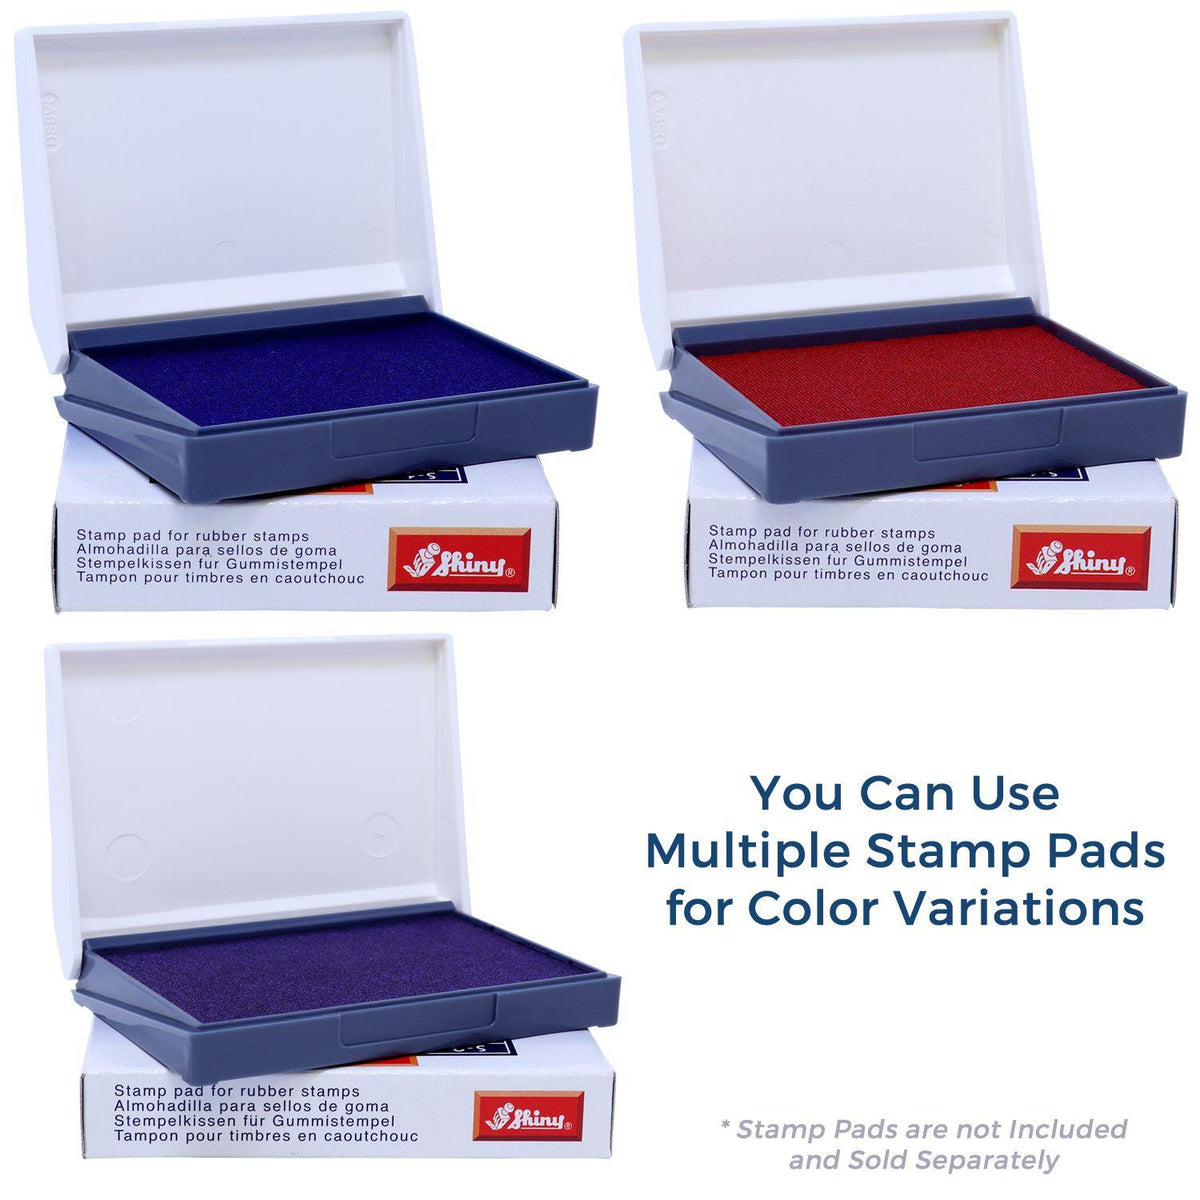 Stamp Pads for Large Asymptomatic Rubber Stamp Available